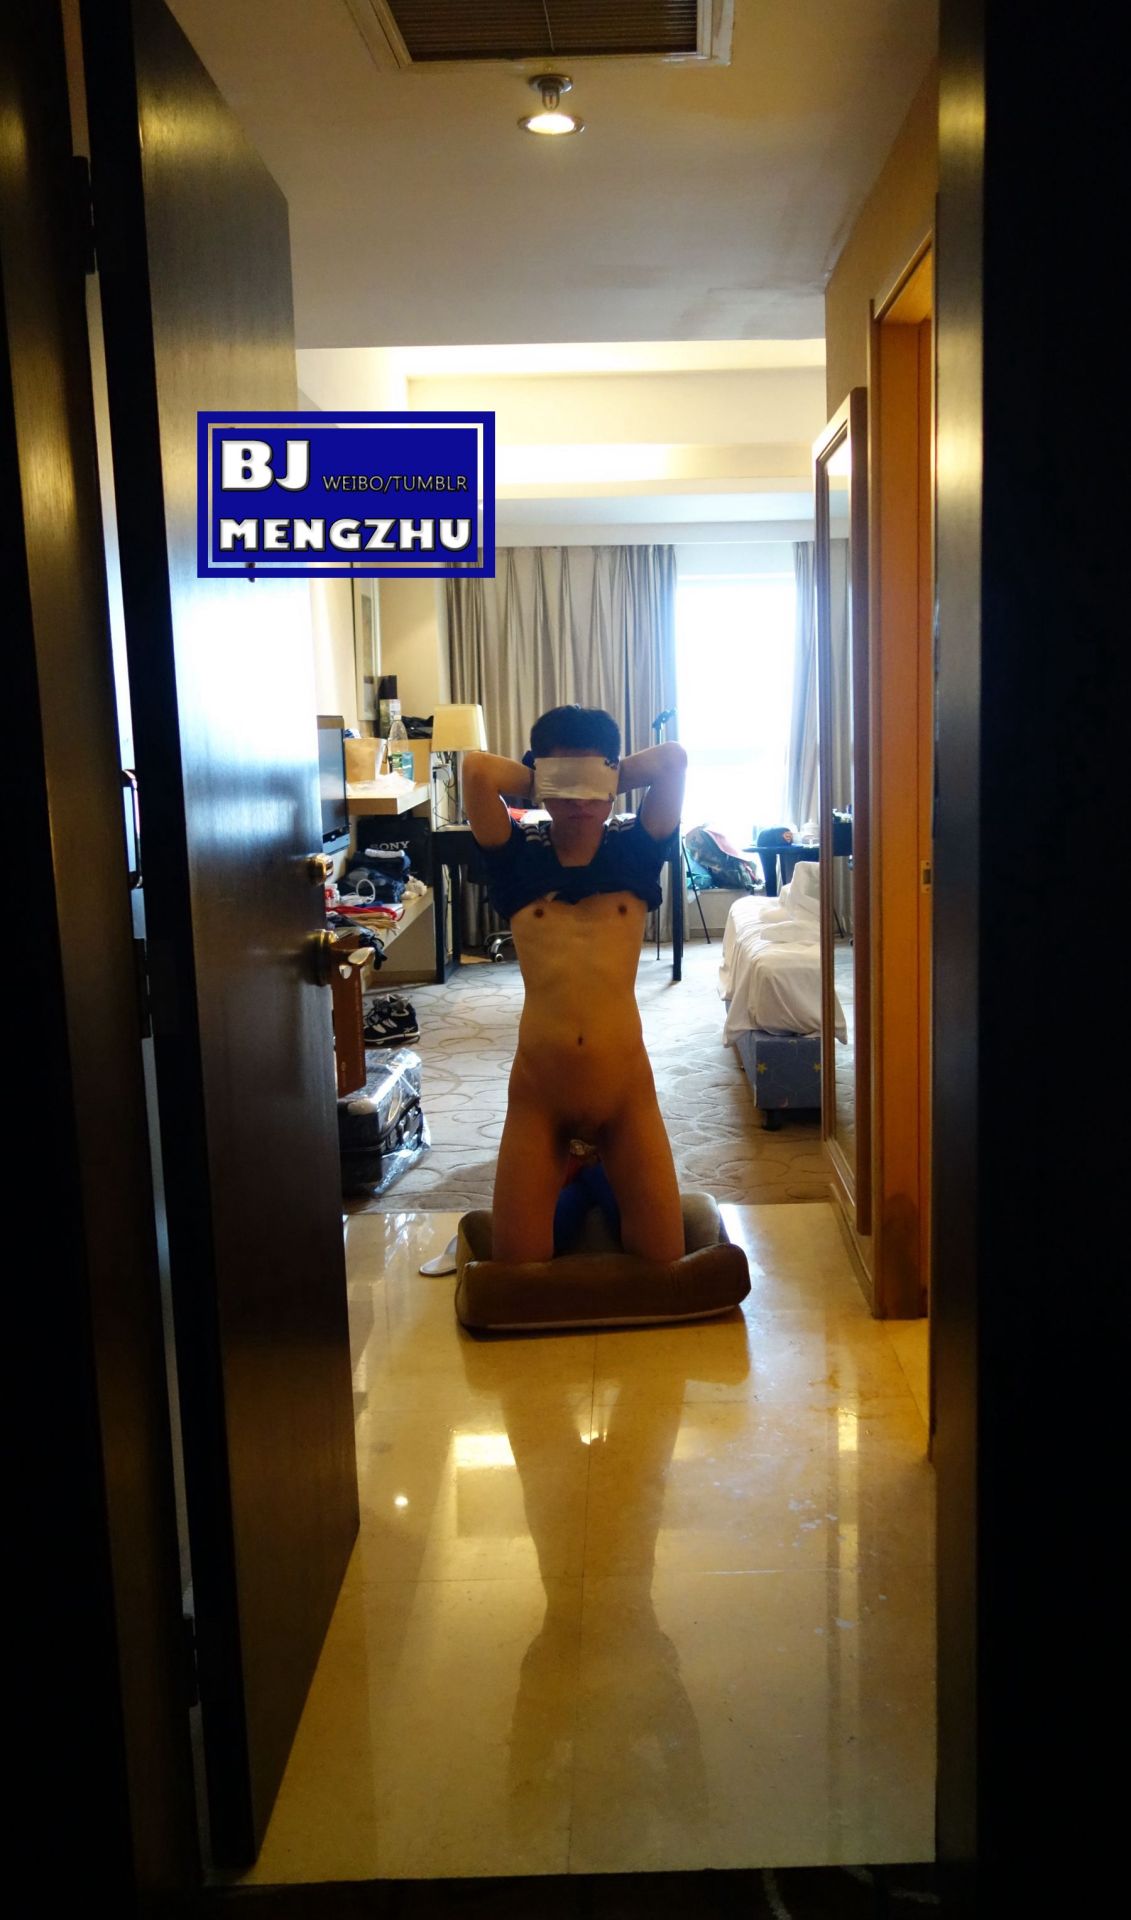 hornychineseboys:  This photo was sent to me by a White businessman who travels regularly